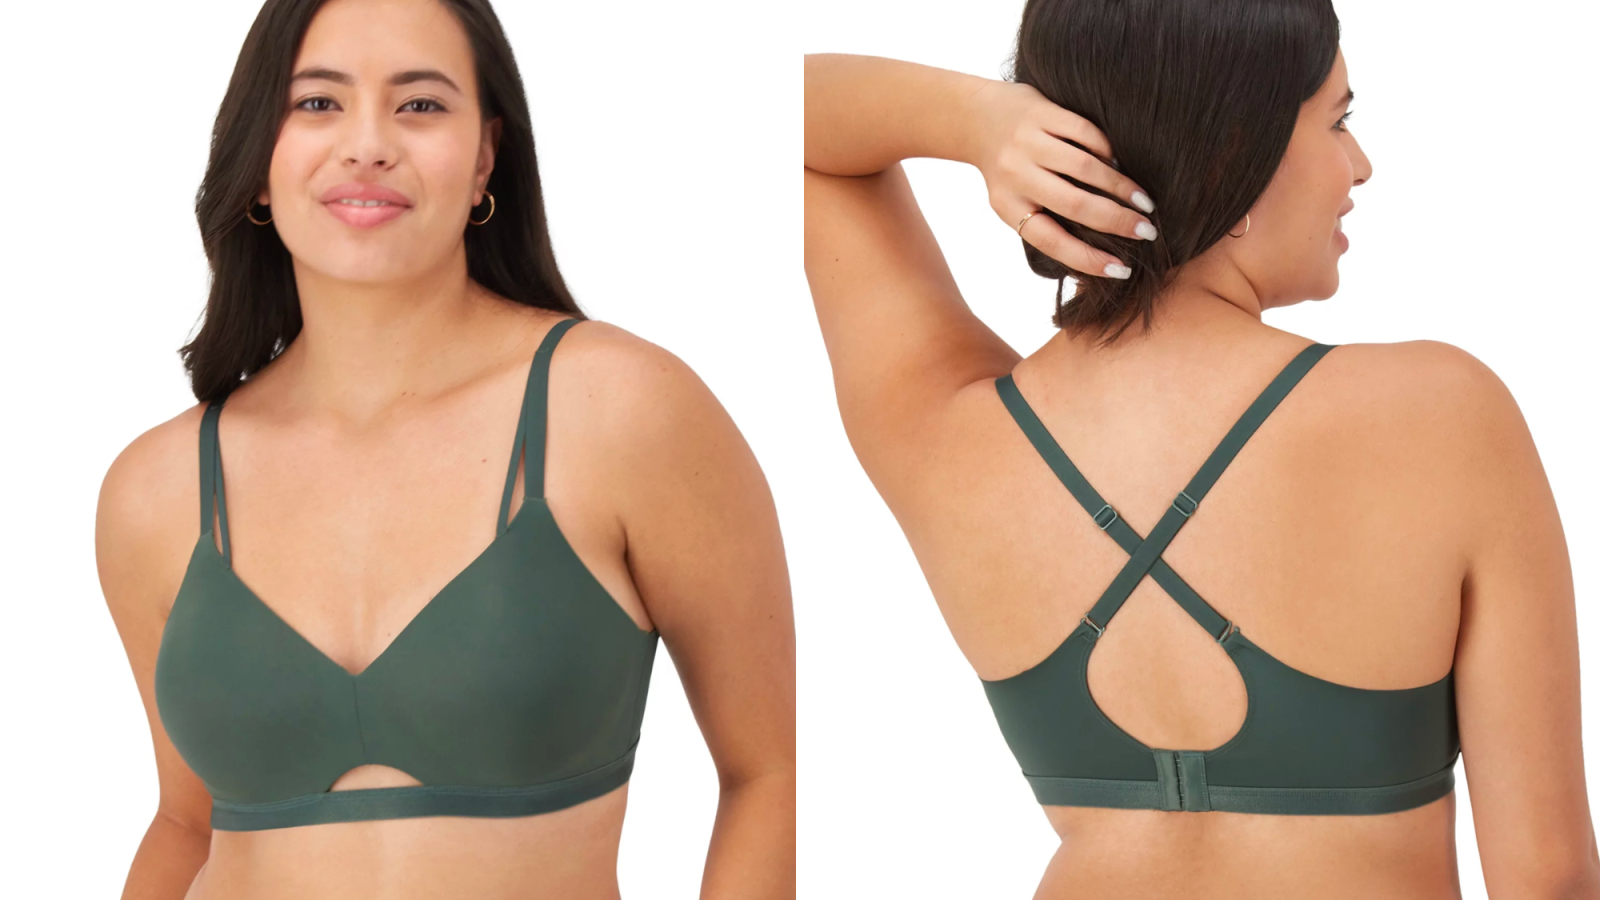 Premium Photo  Supportive and comfortable wireless bra tailored for allday  wear ensuring a smooth and enjoyable experience from morning to night  Generated by AI